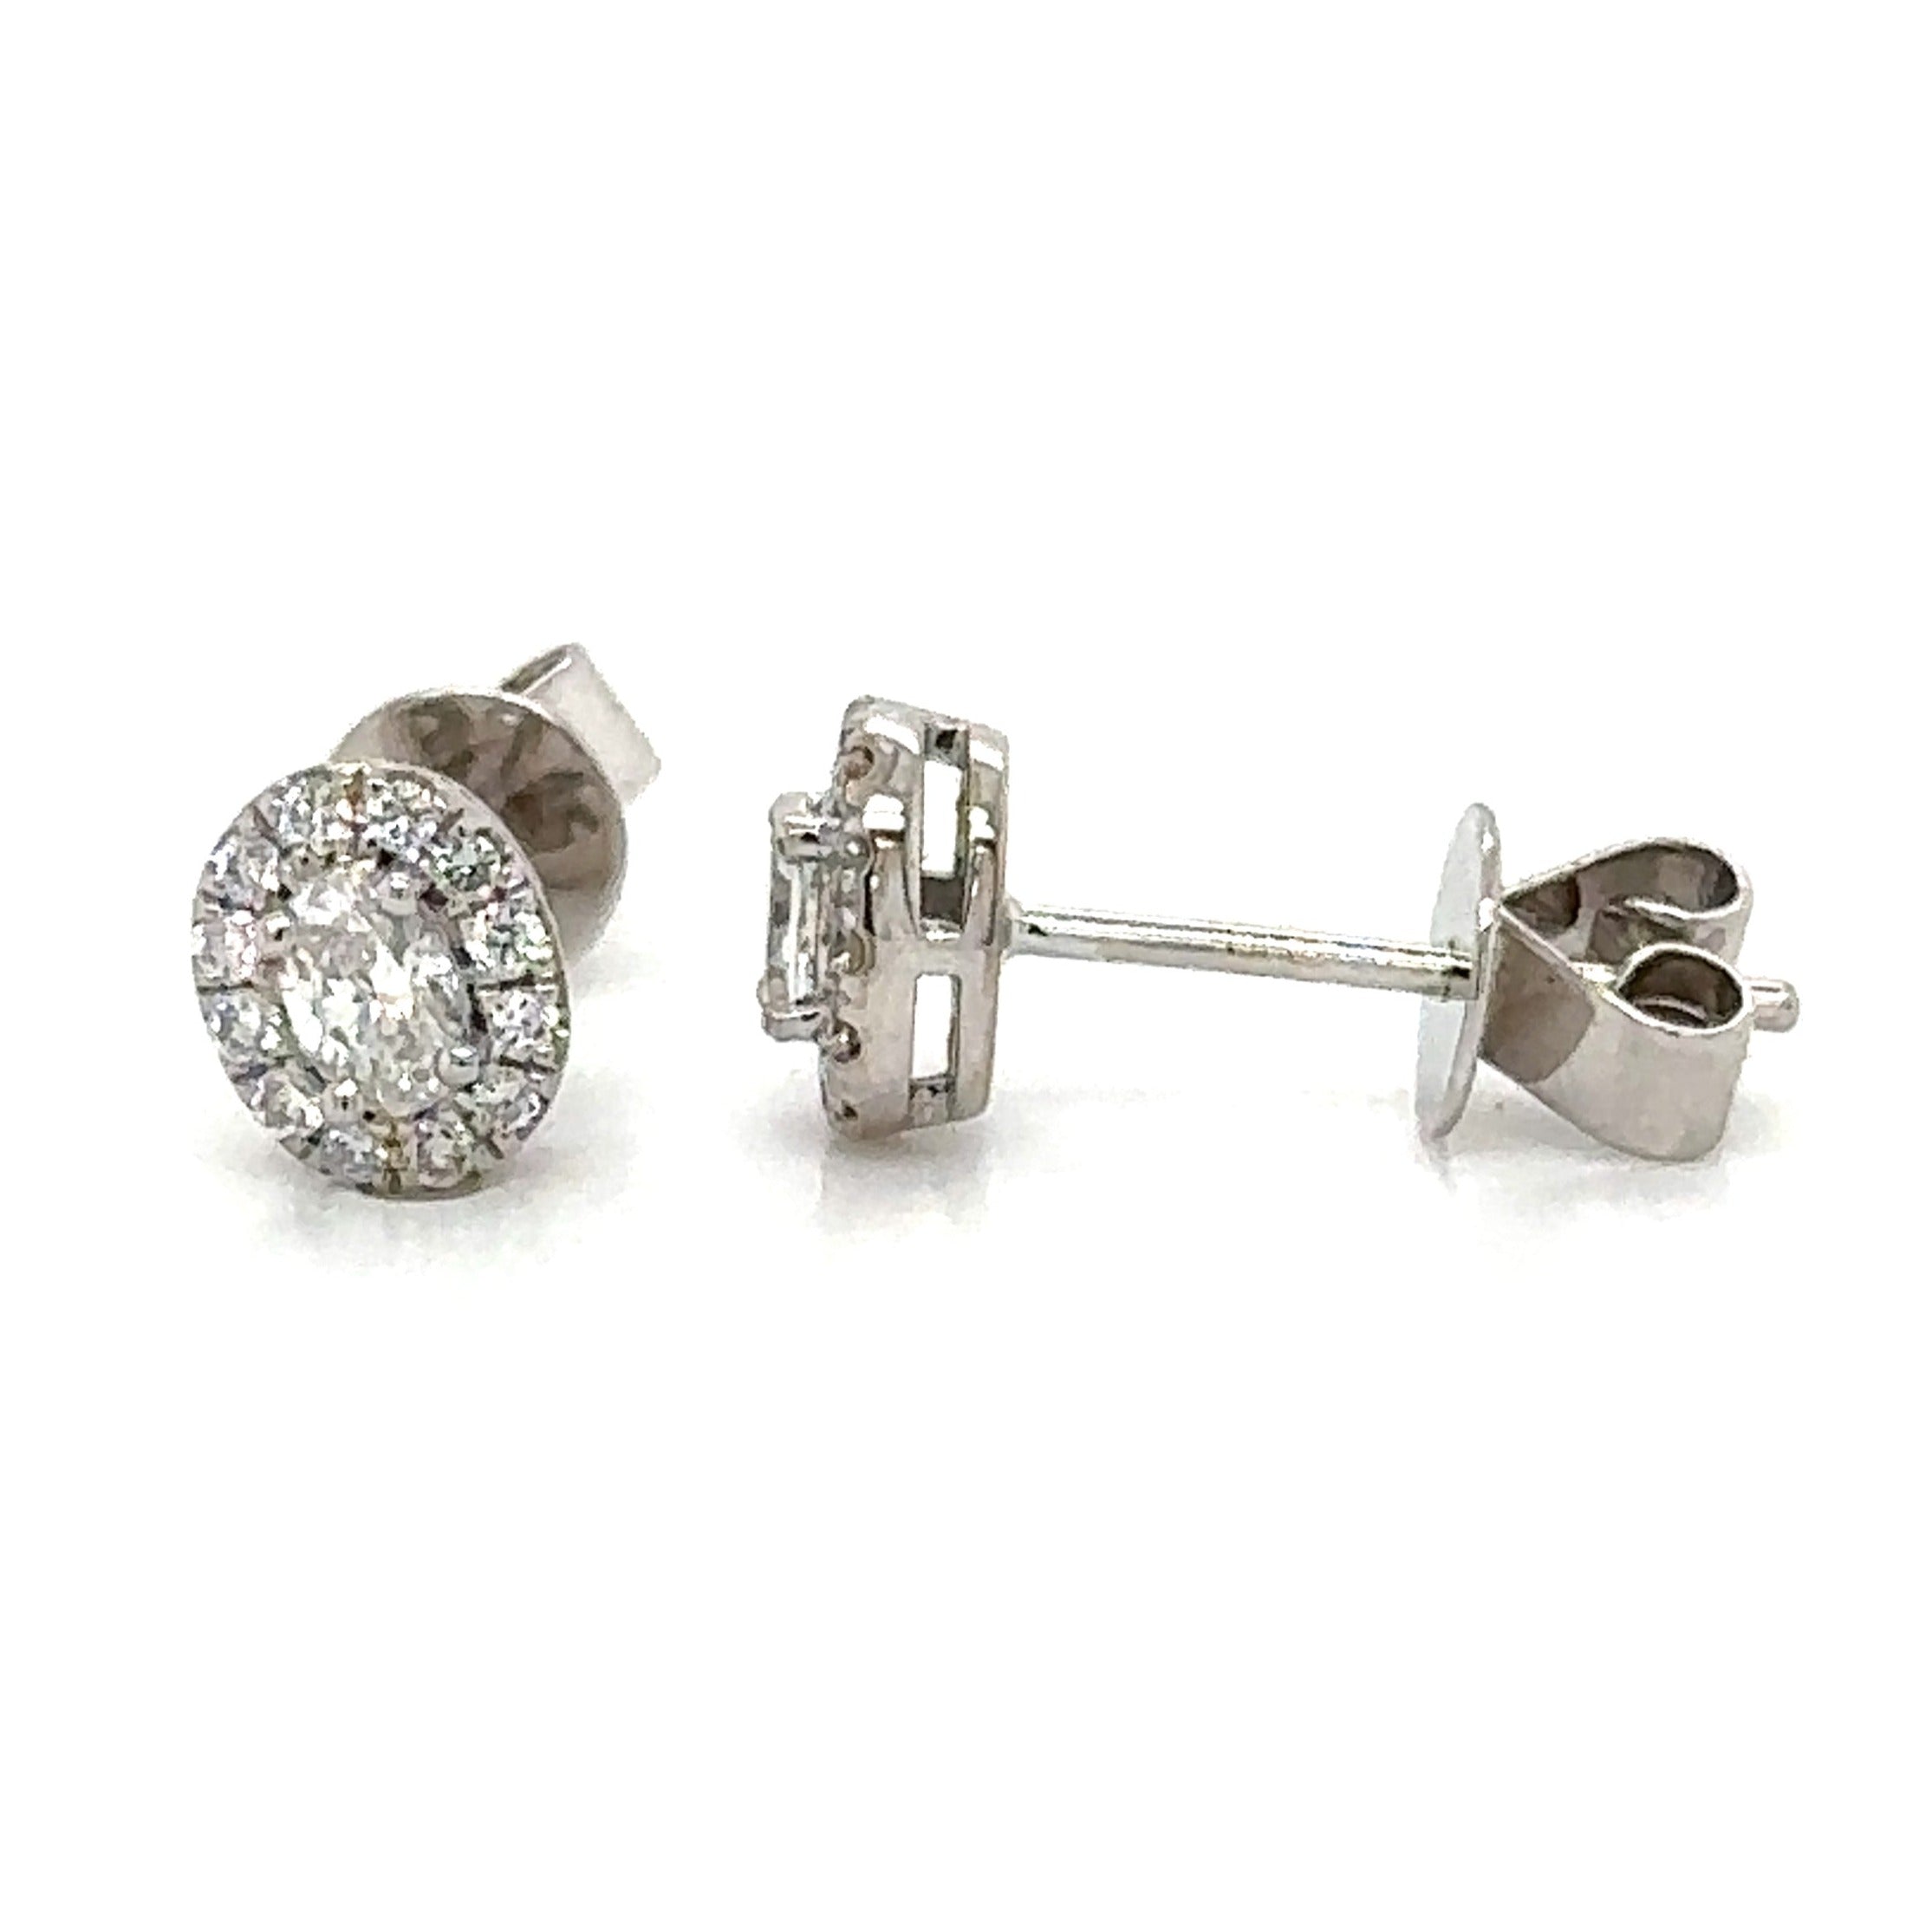 Diamond 0.33ctw Oval Center Stud Earrings with Halo